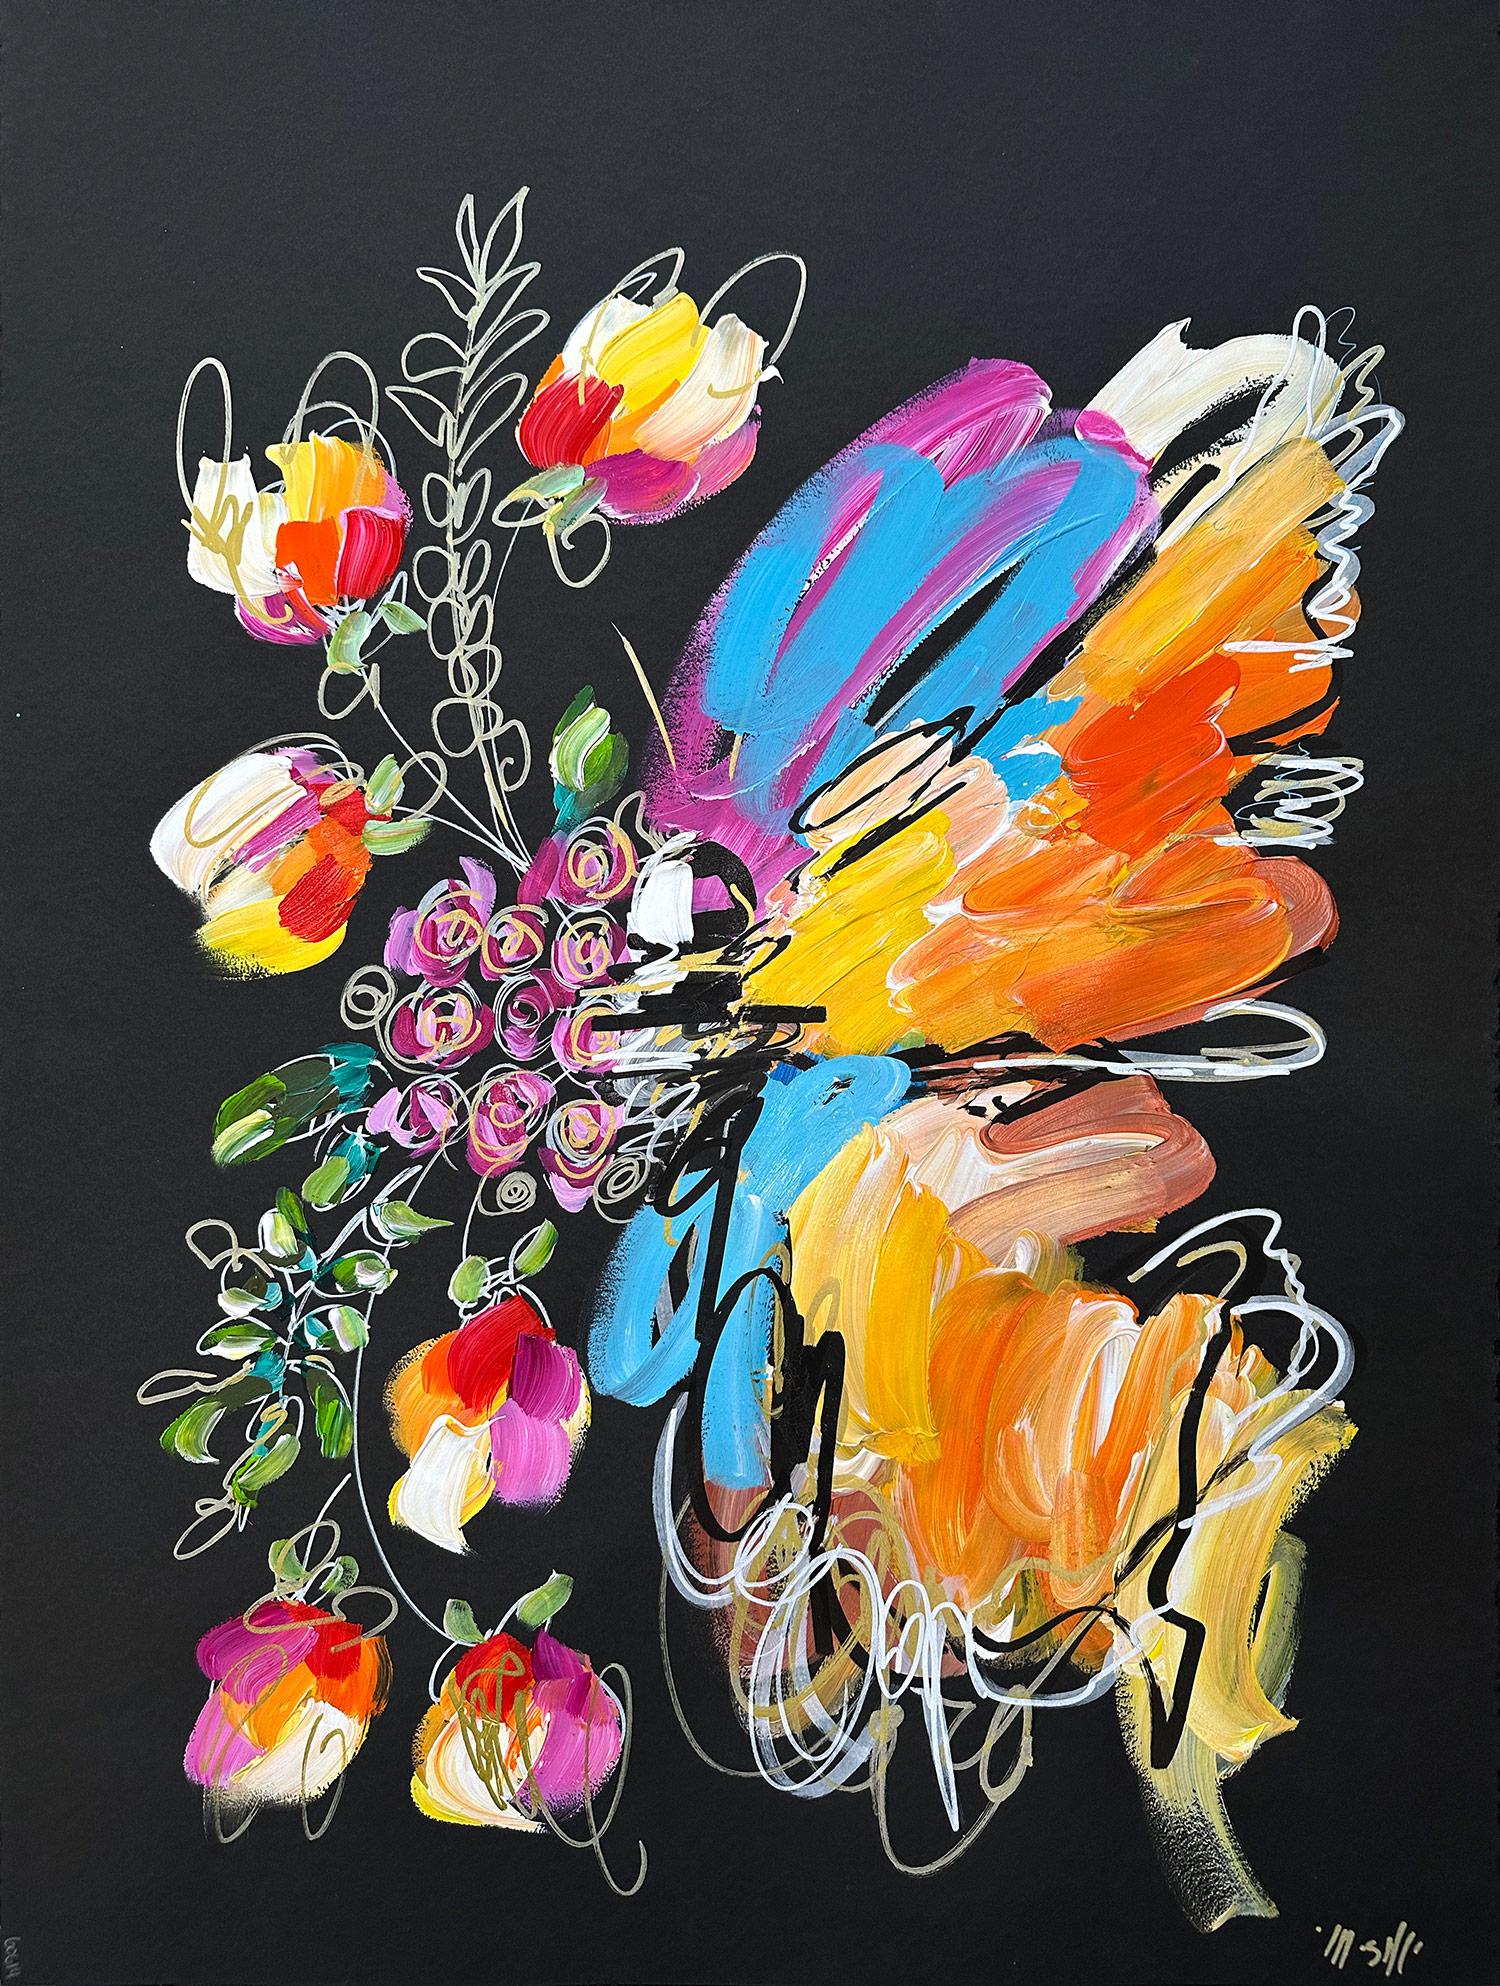 Ash Almonte Figurative Painting - "Butterfly Garden" Colorful Abstract Painting Acrylic on Stonehenge Paper